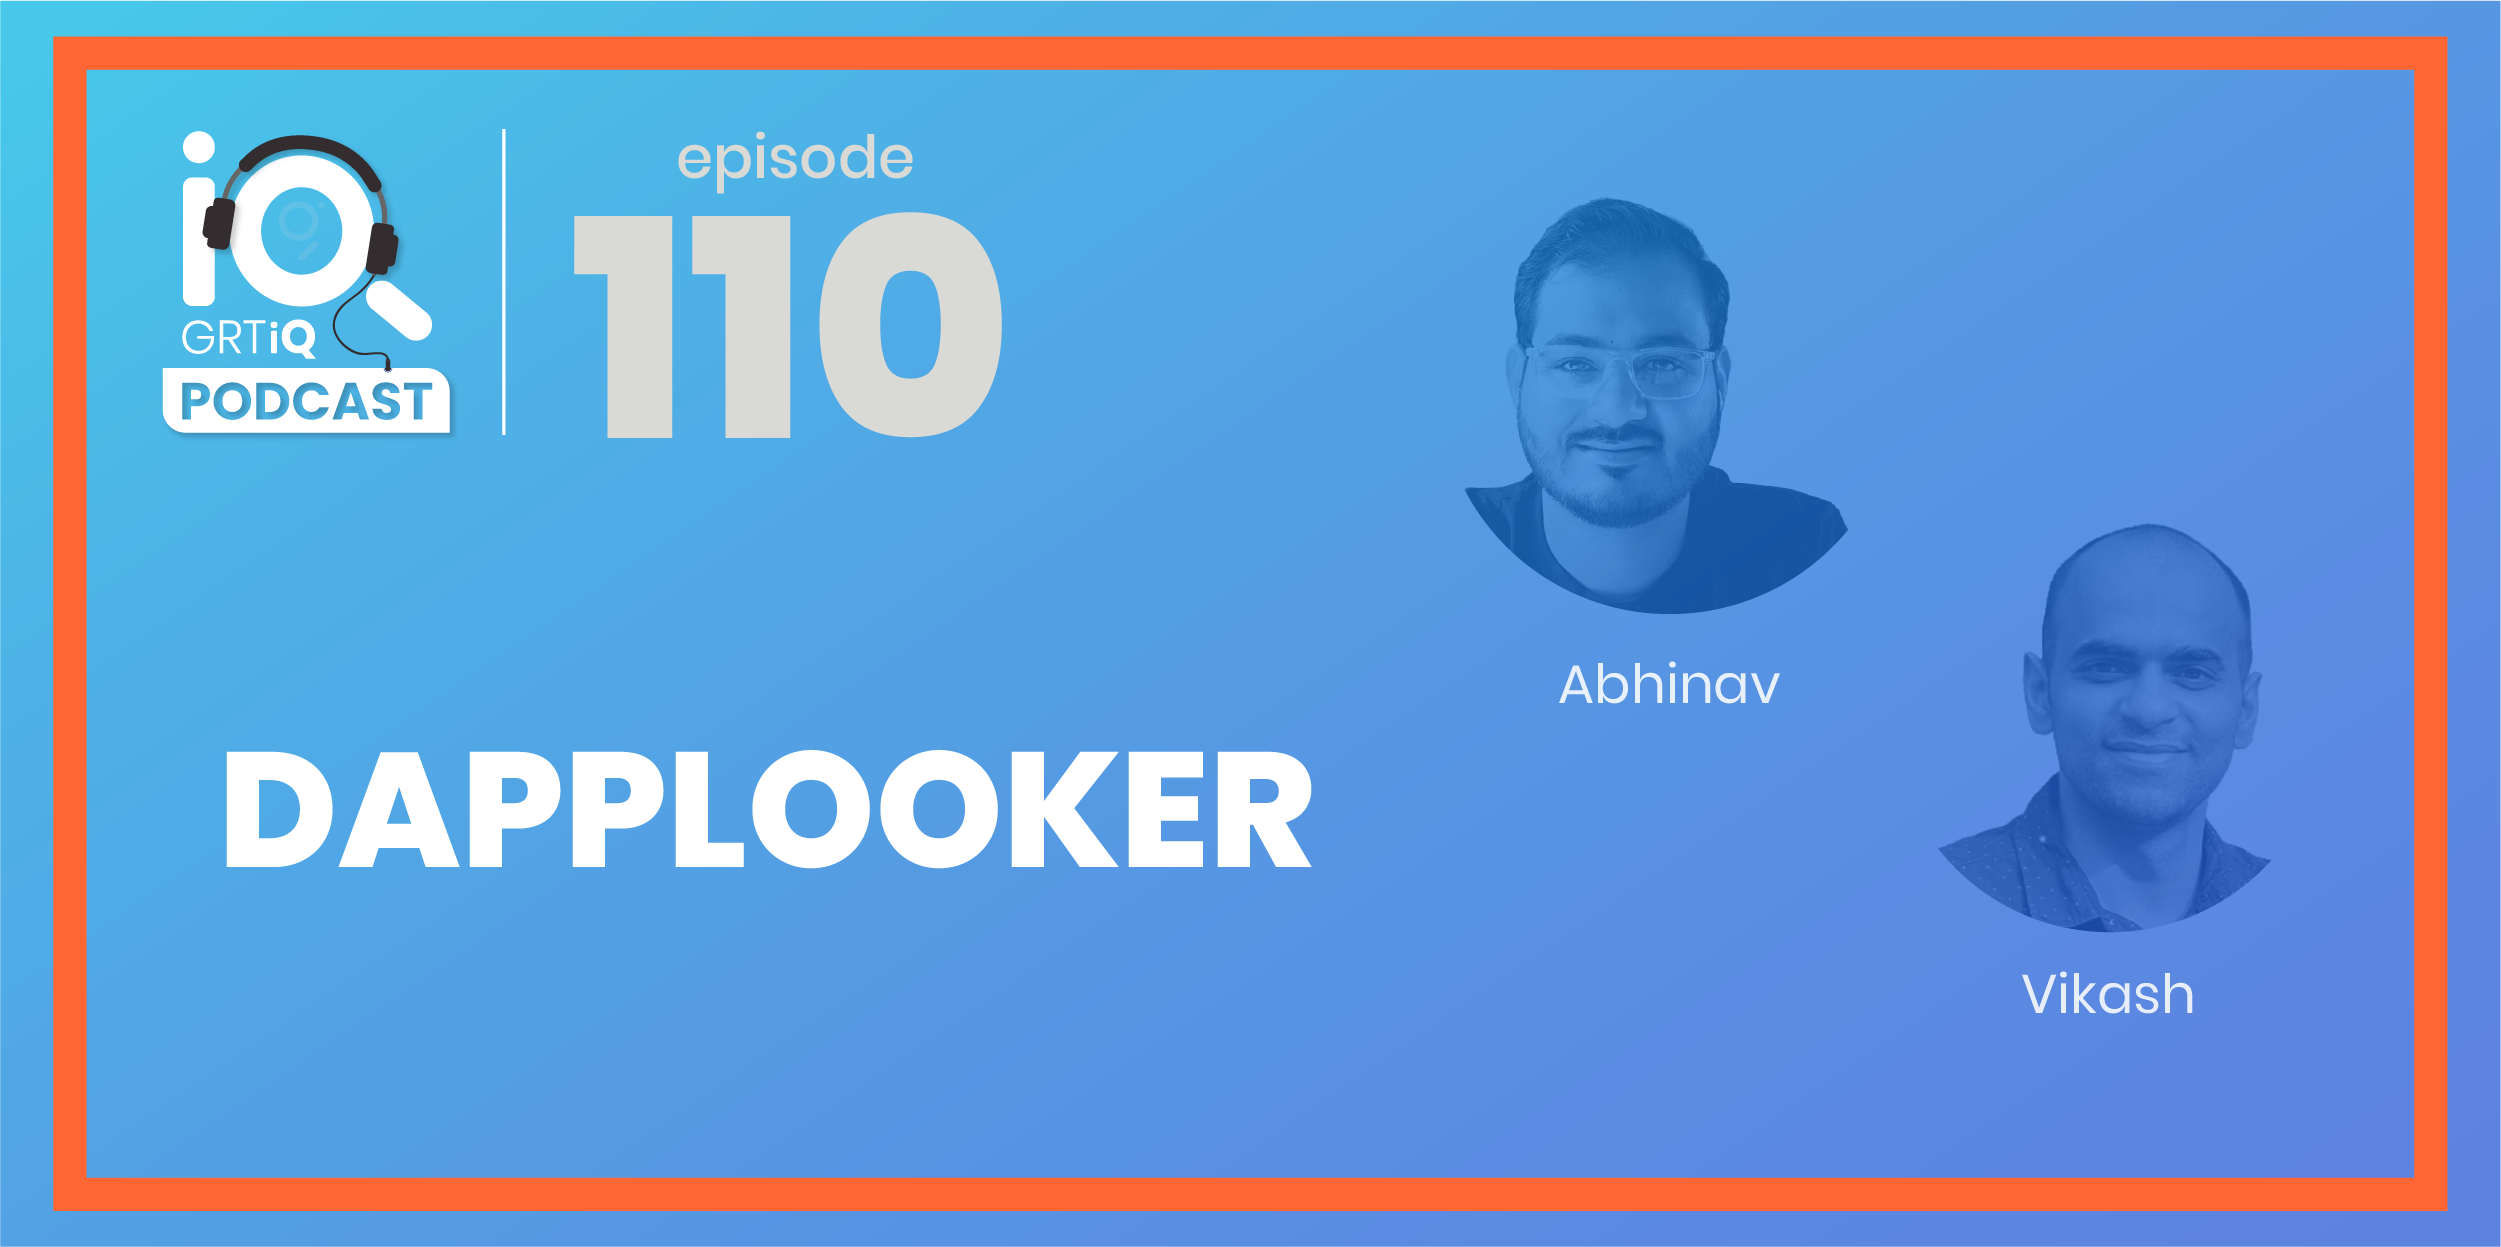 GRTiQ Podcast Episode #110: Abhinav Singh (Co-Founder) and Vikash Choubey (Head of Engineering) with DappLooker, a no-code, muti-chain blockchain analytics solution.